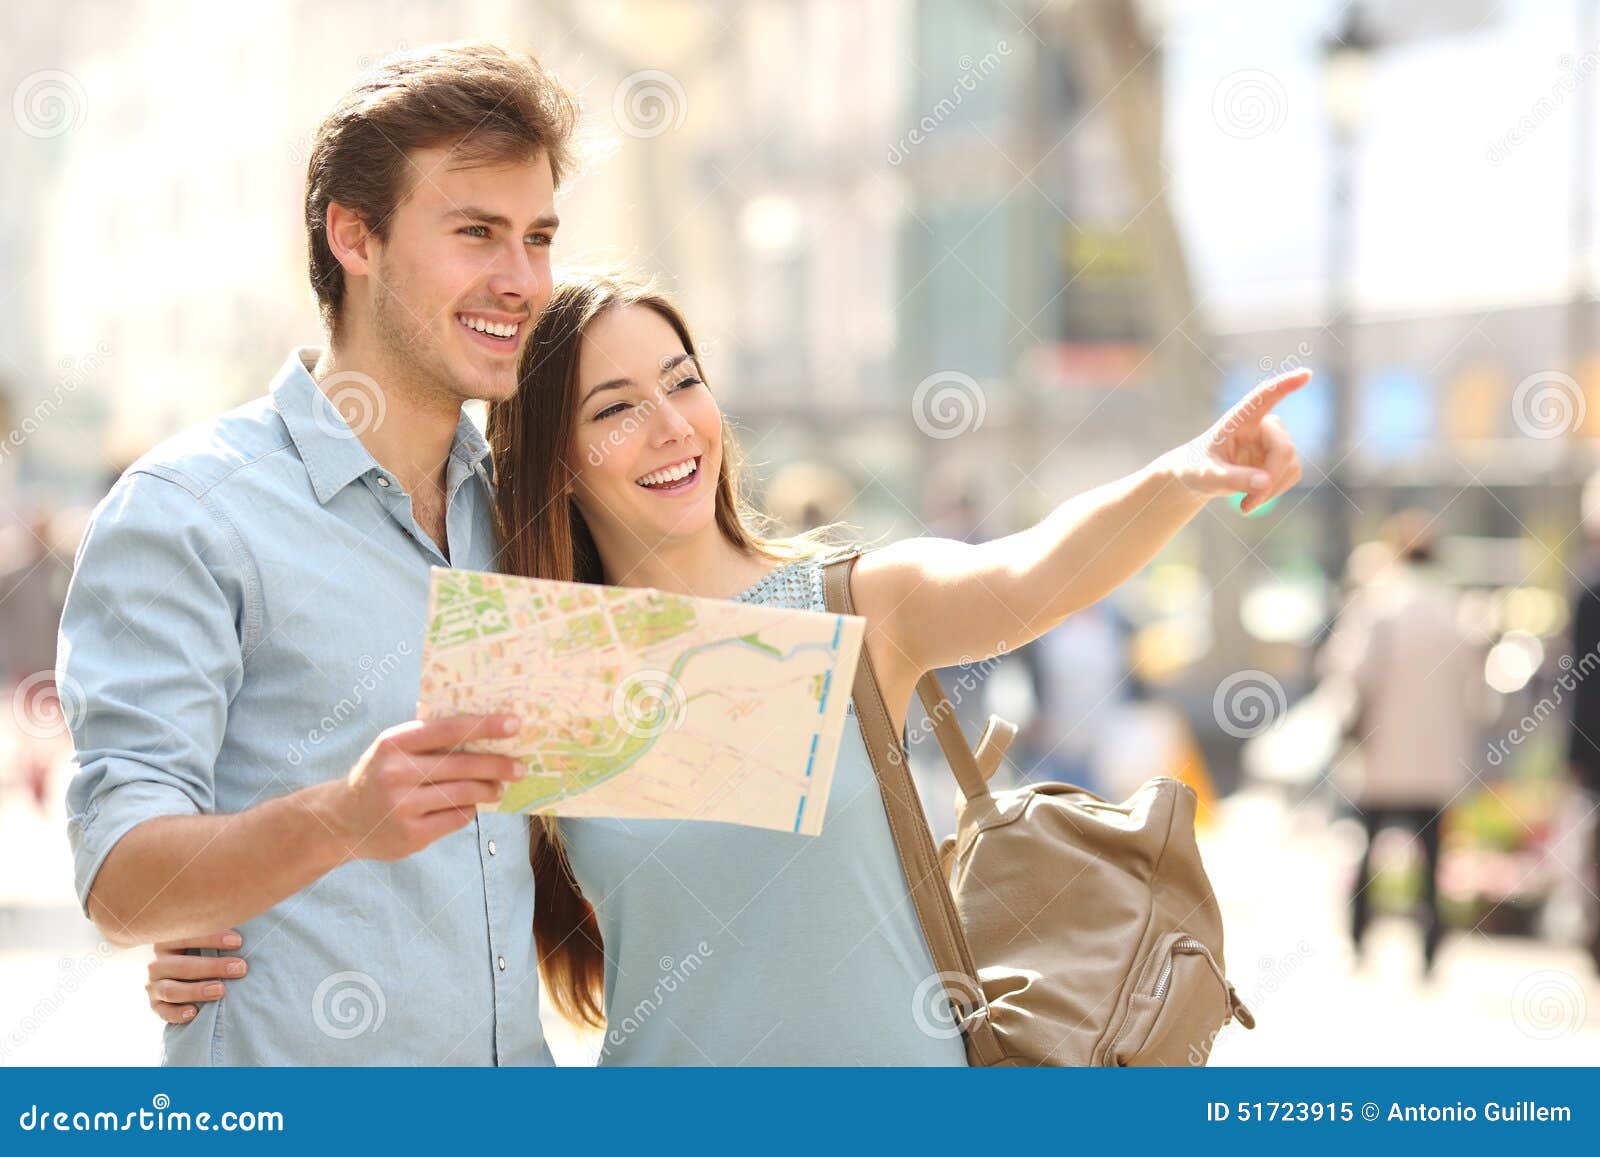 couple of tourists consulting a city guide searching locations